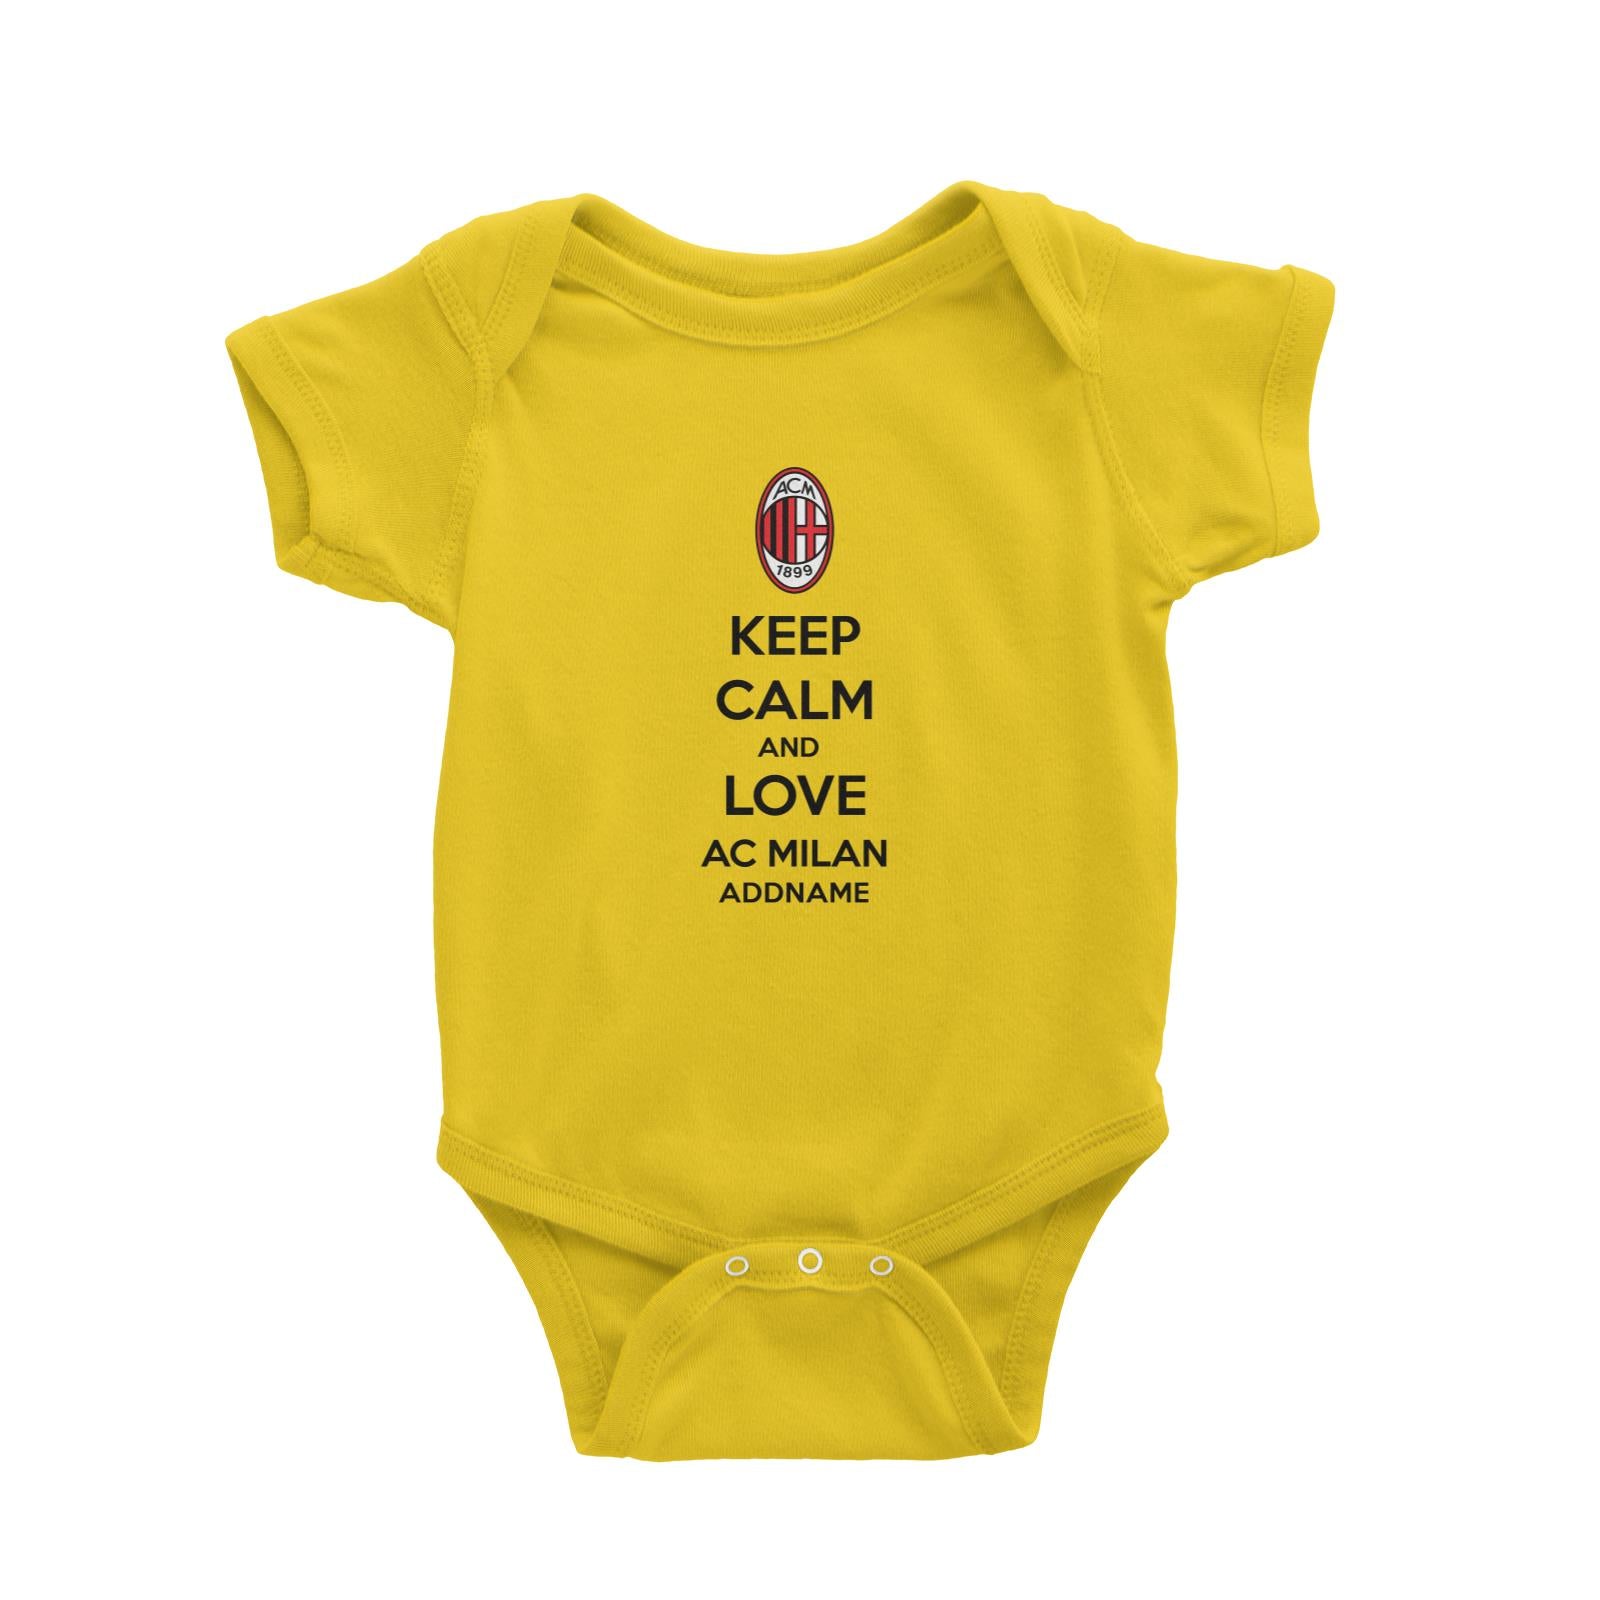 AC Milan Football Keep Calm And Love Serires Addname Baby Romper